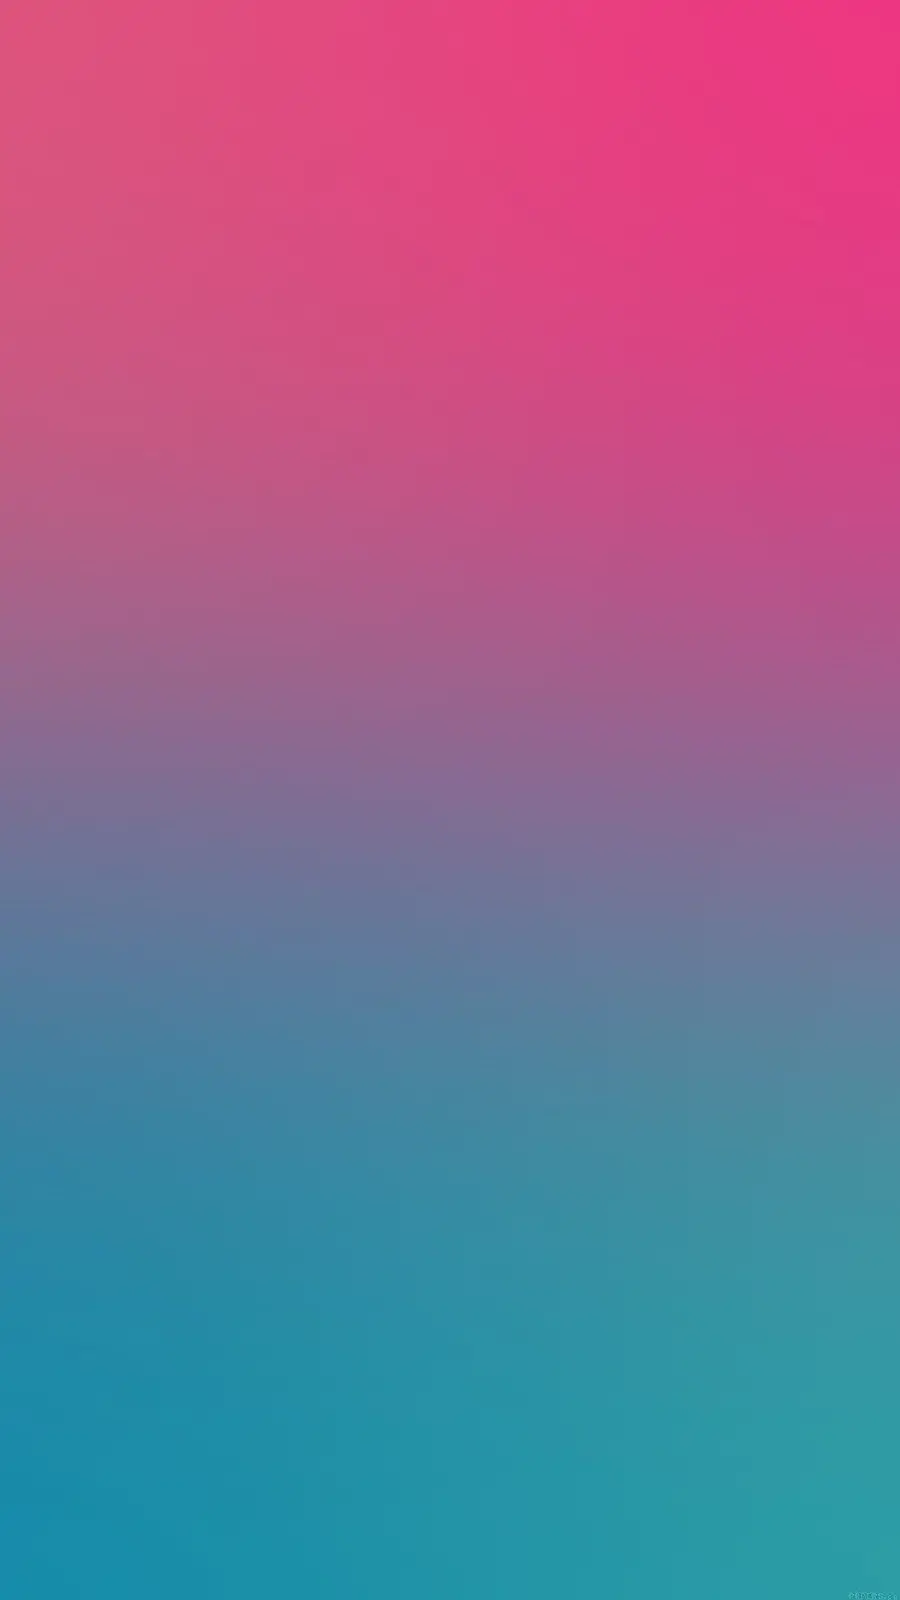 New gradient wallpaper in pink and blue colors